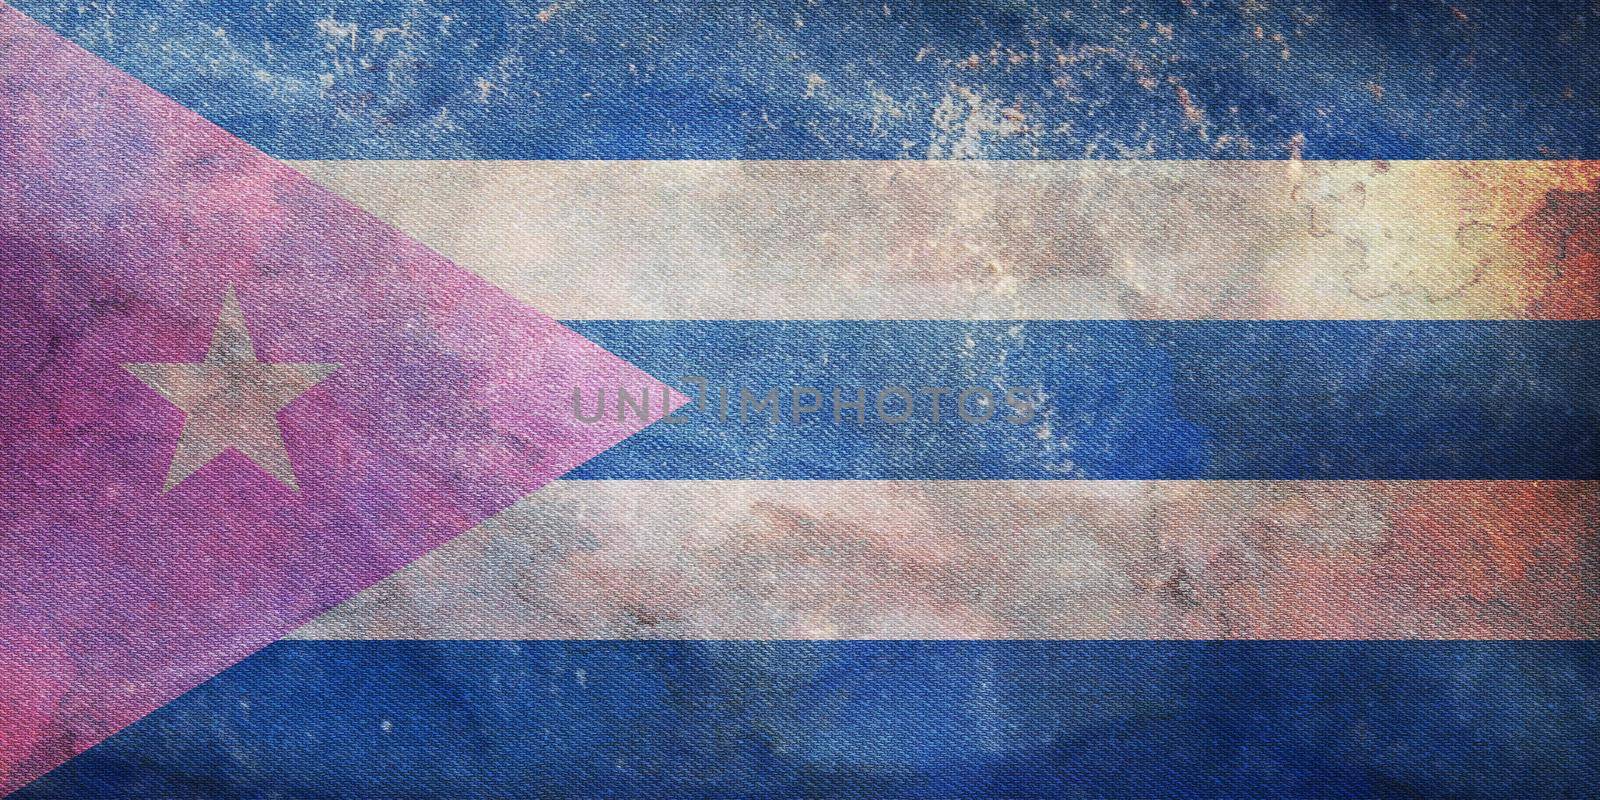 Top view of retro flag of Bisexual, Cuba with grunge texture, no flagpole. Plane design, layout. Flag background. Freedom and love concept. Pride month, activism, community and freedom